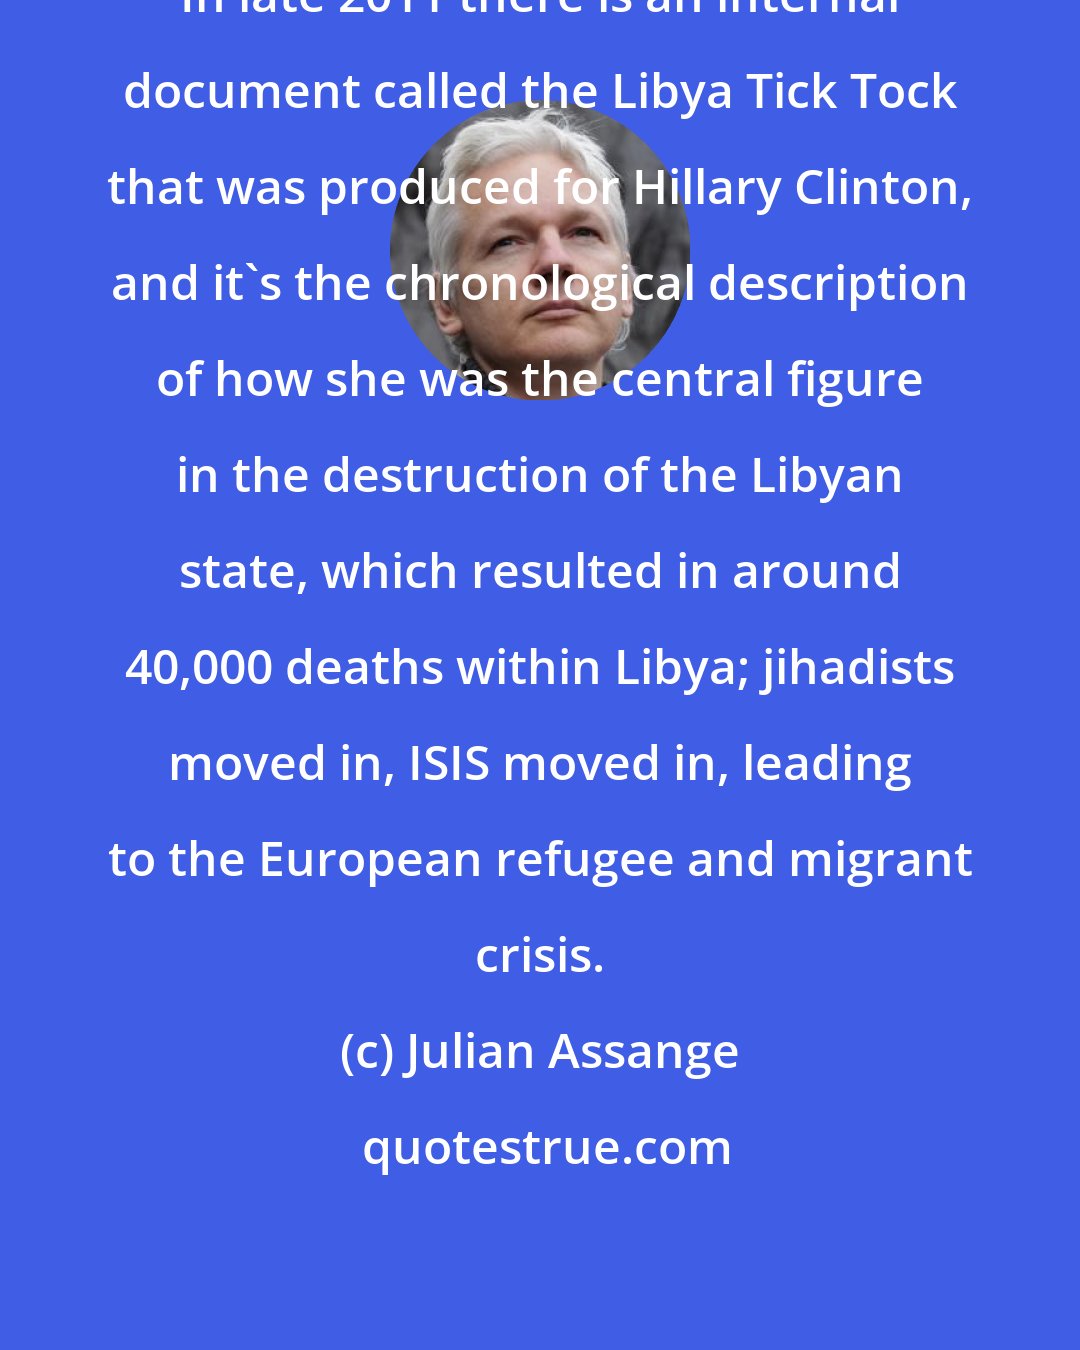 Julian Assange: In late 2011 there is an internal document called the Libya Tick Tock that was produced for Hillary Clinton, and it's the chronological description of how she was the central figure in the destruction of the Libyan state, which resulted in around 40,000 deaths within Libya; jihadists moved in, ISIS moved in, leading to the European refugee and migrant crisis.